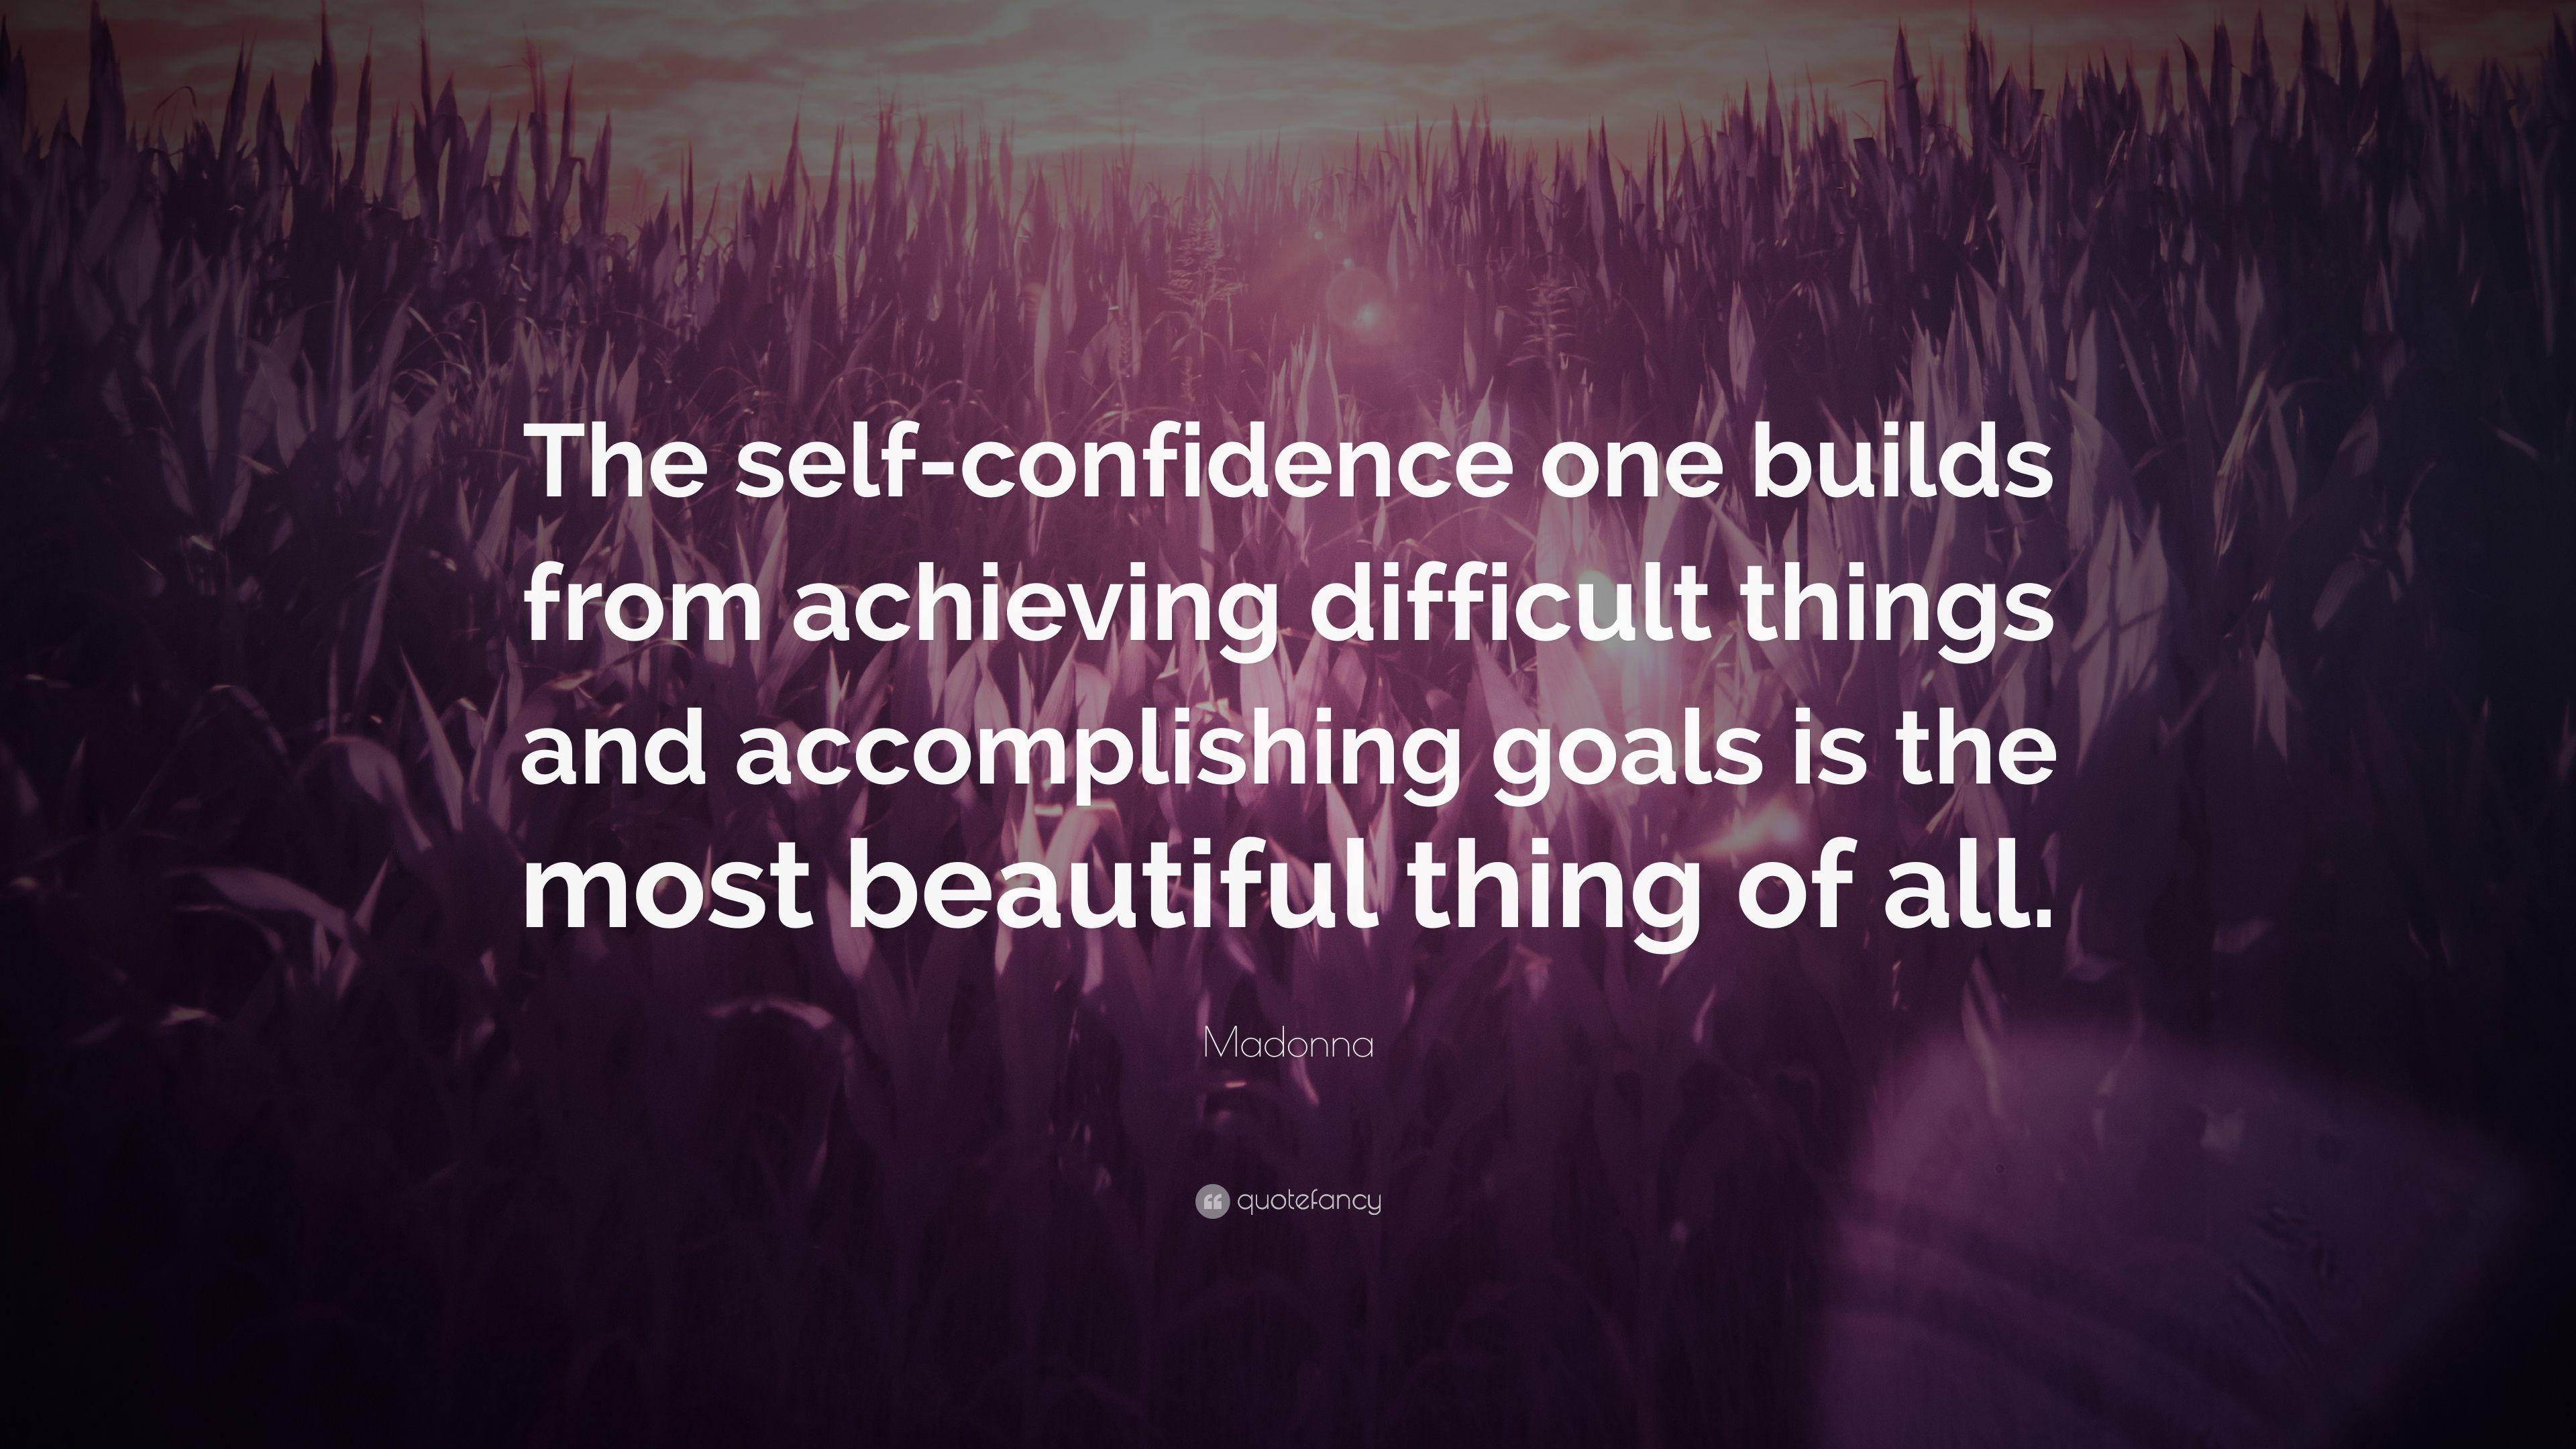 Madonna Quote: “The Self Confidence One Builds From Achieving